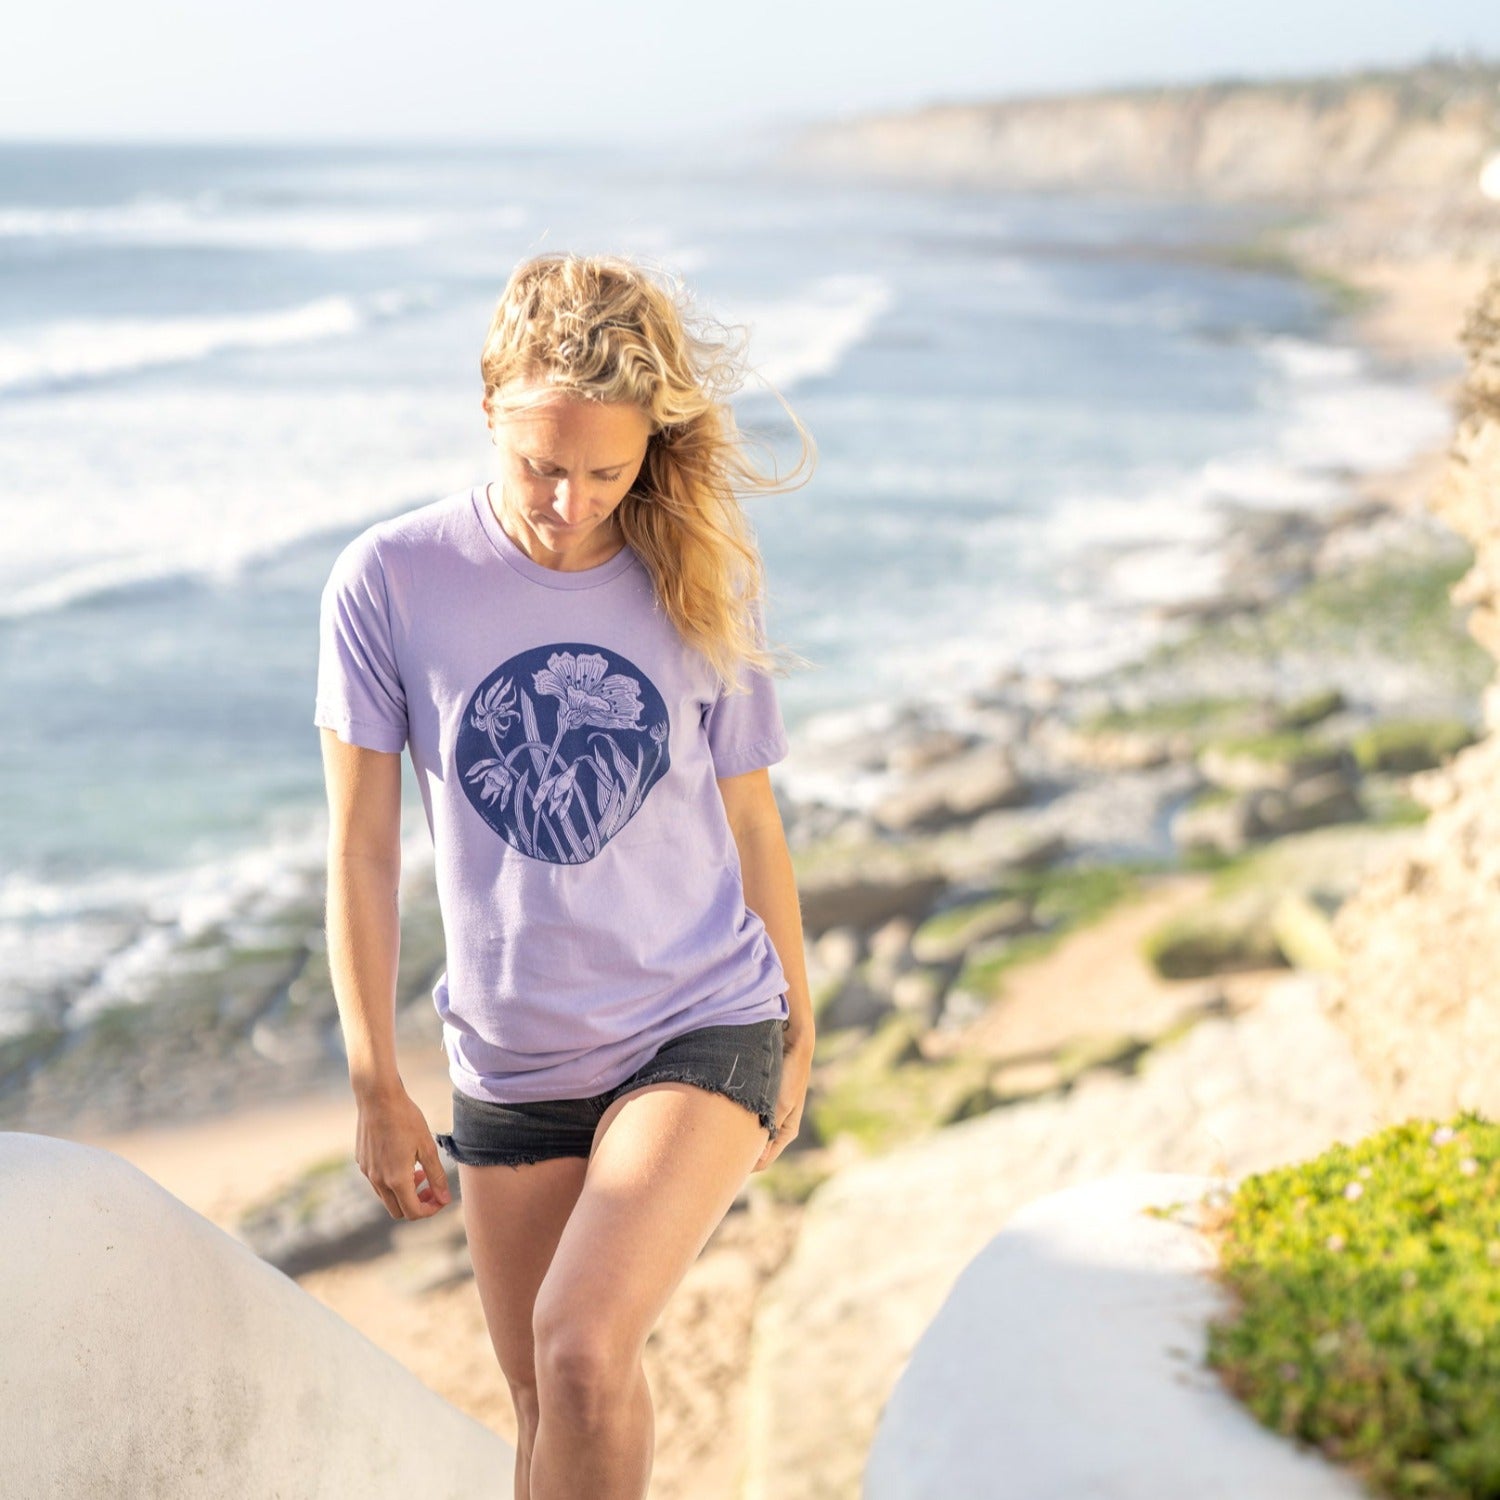 Girl walking up stairs with a beautiful beach scene in the distance. Girl has blond hair and is wearing a light purple shirt with a dark purple flower print on it. 